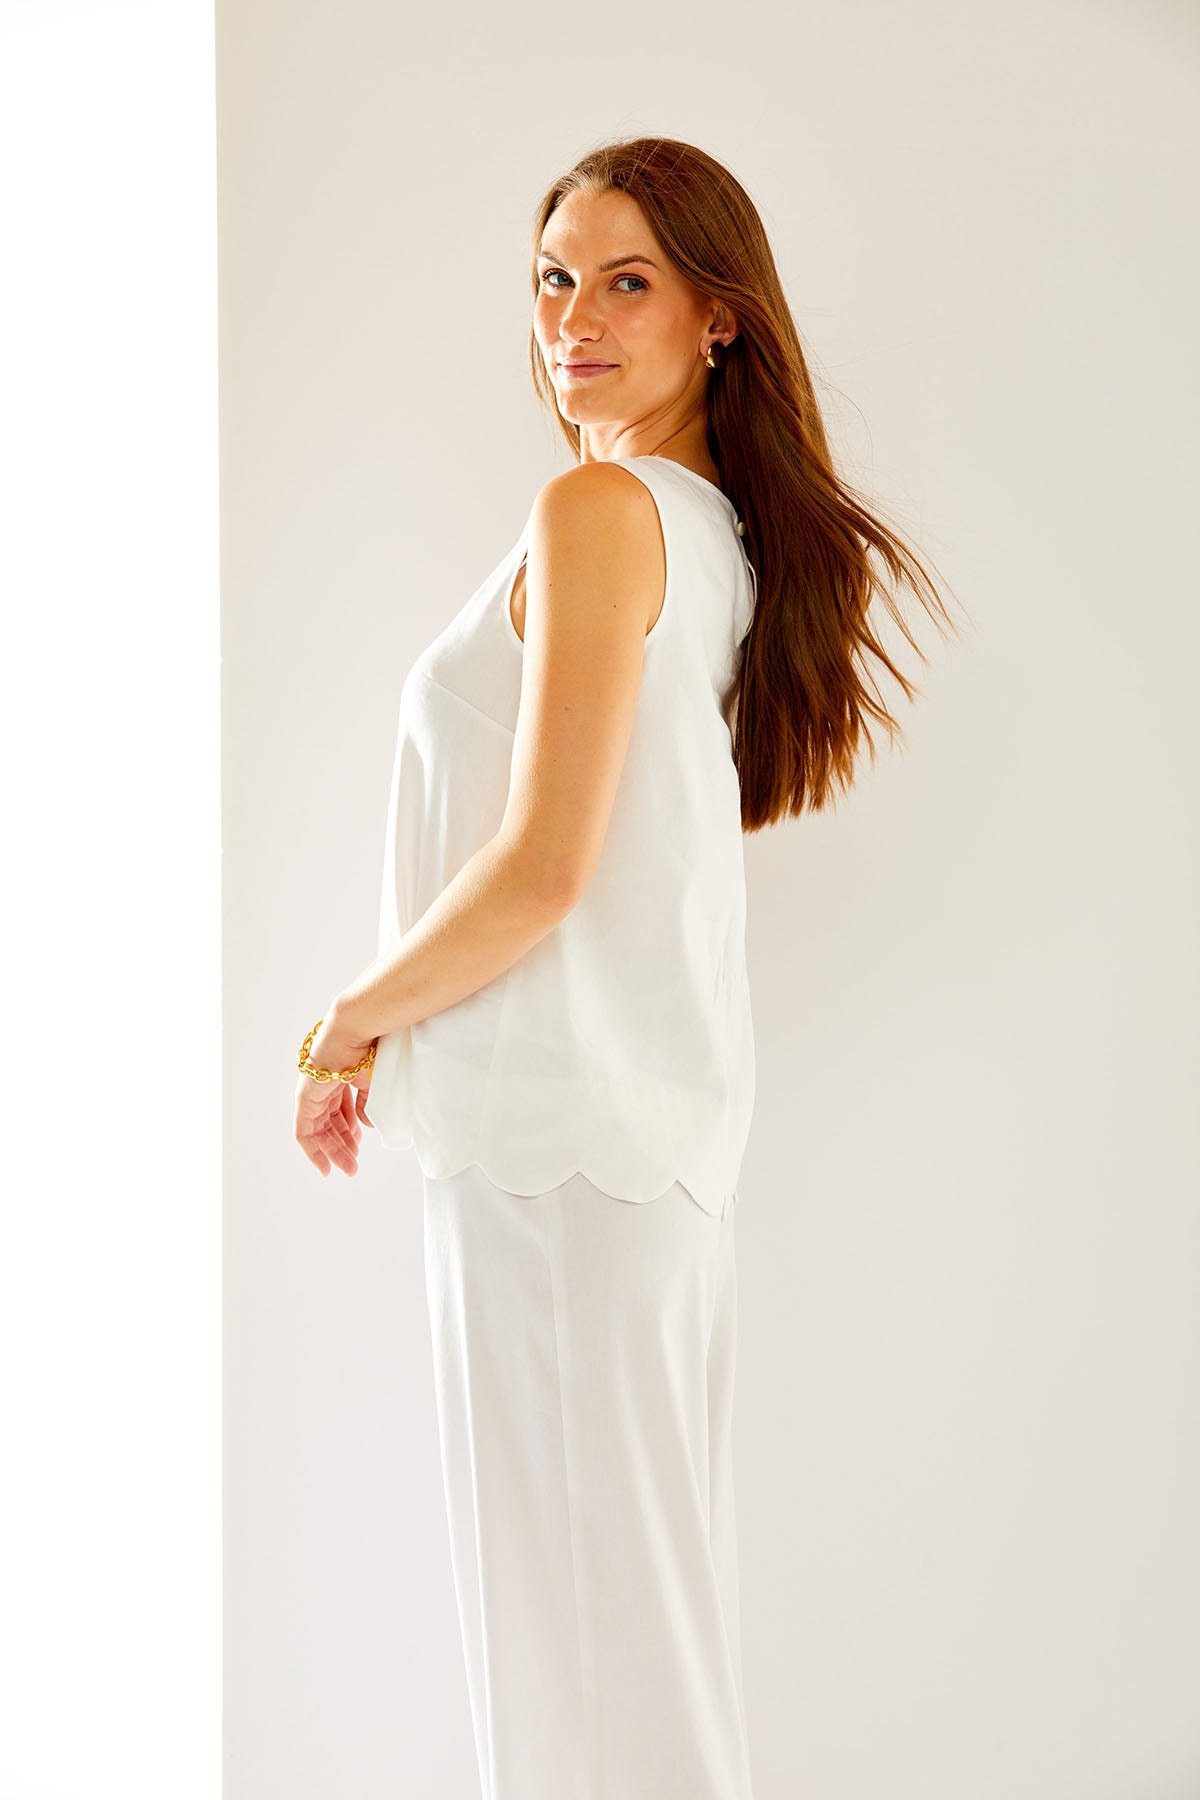 Woman in white top with scallop detail